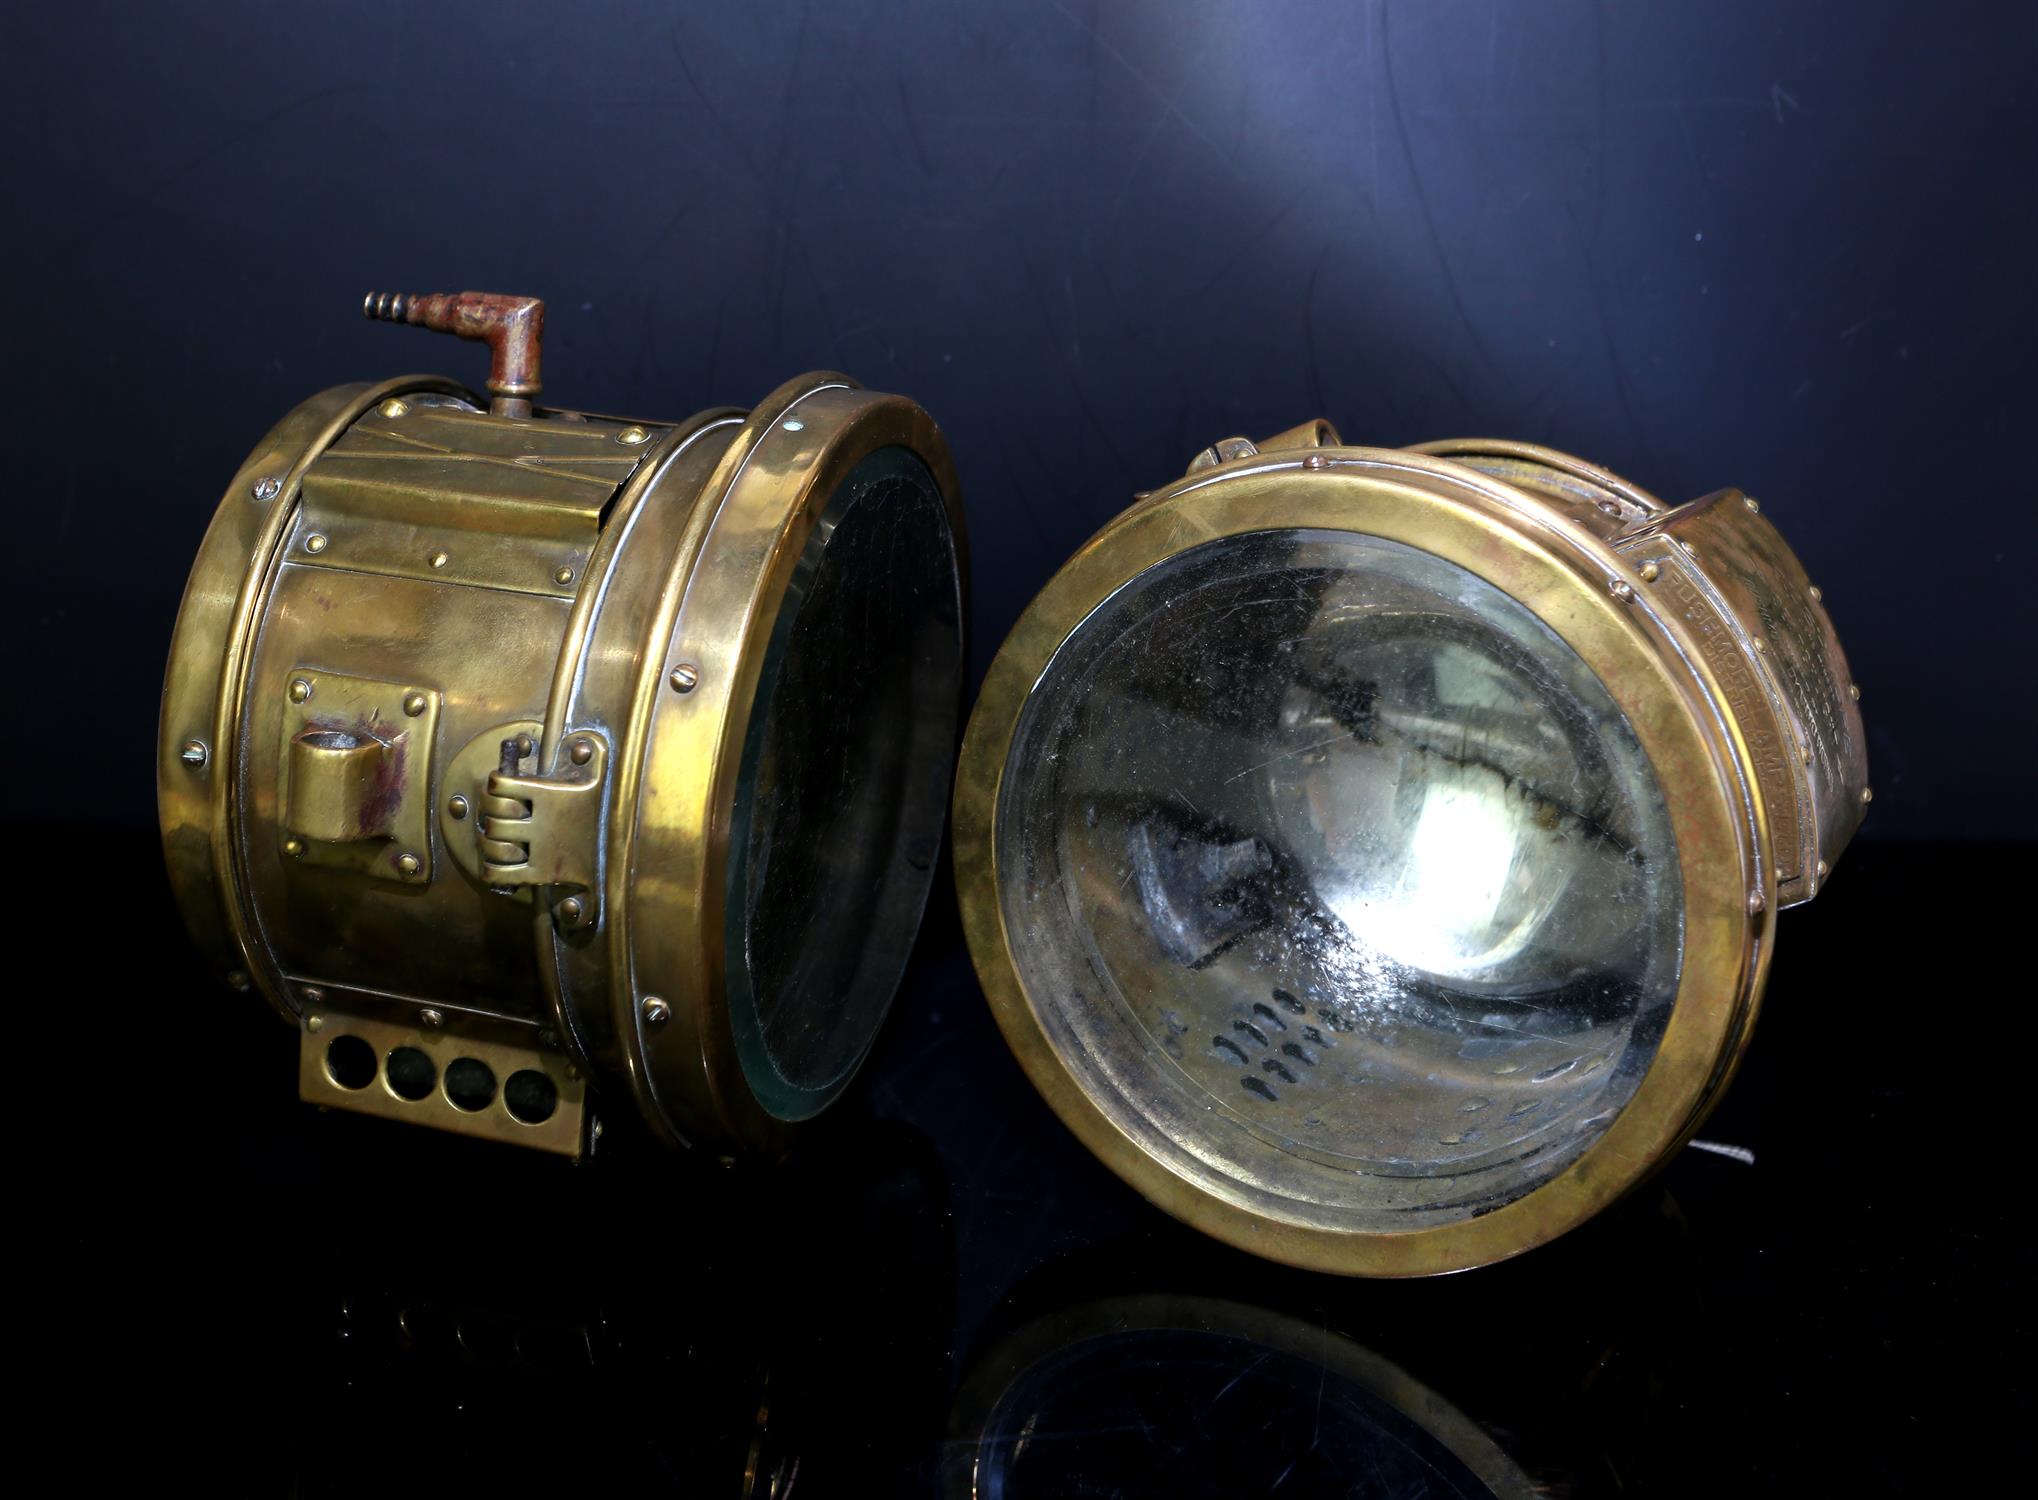 Pair of brass "Searchlight " headlamps by Rushmore Dynamo Works, Plainfield New Jersey, U.S.A.